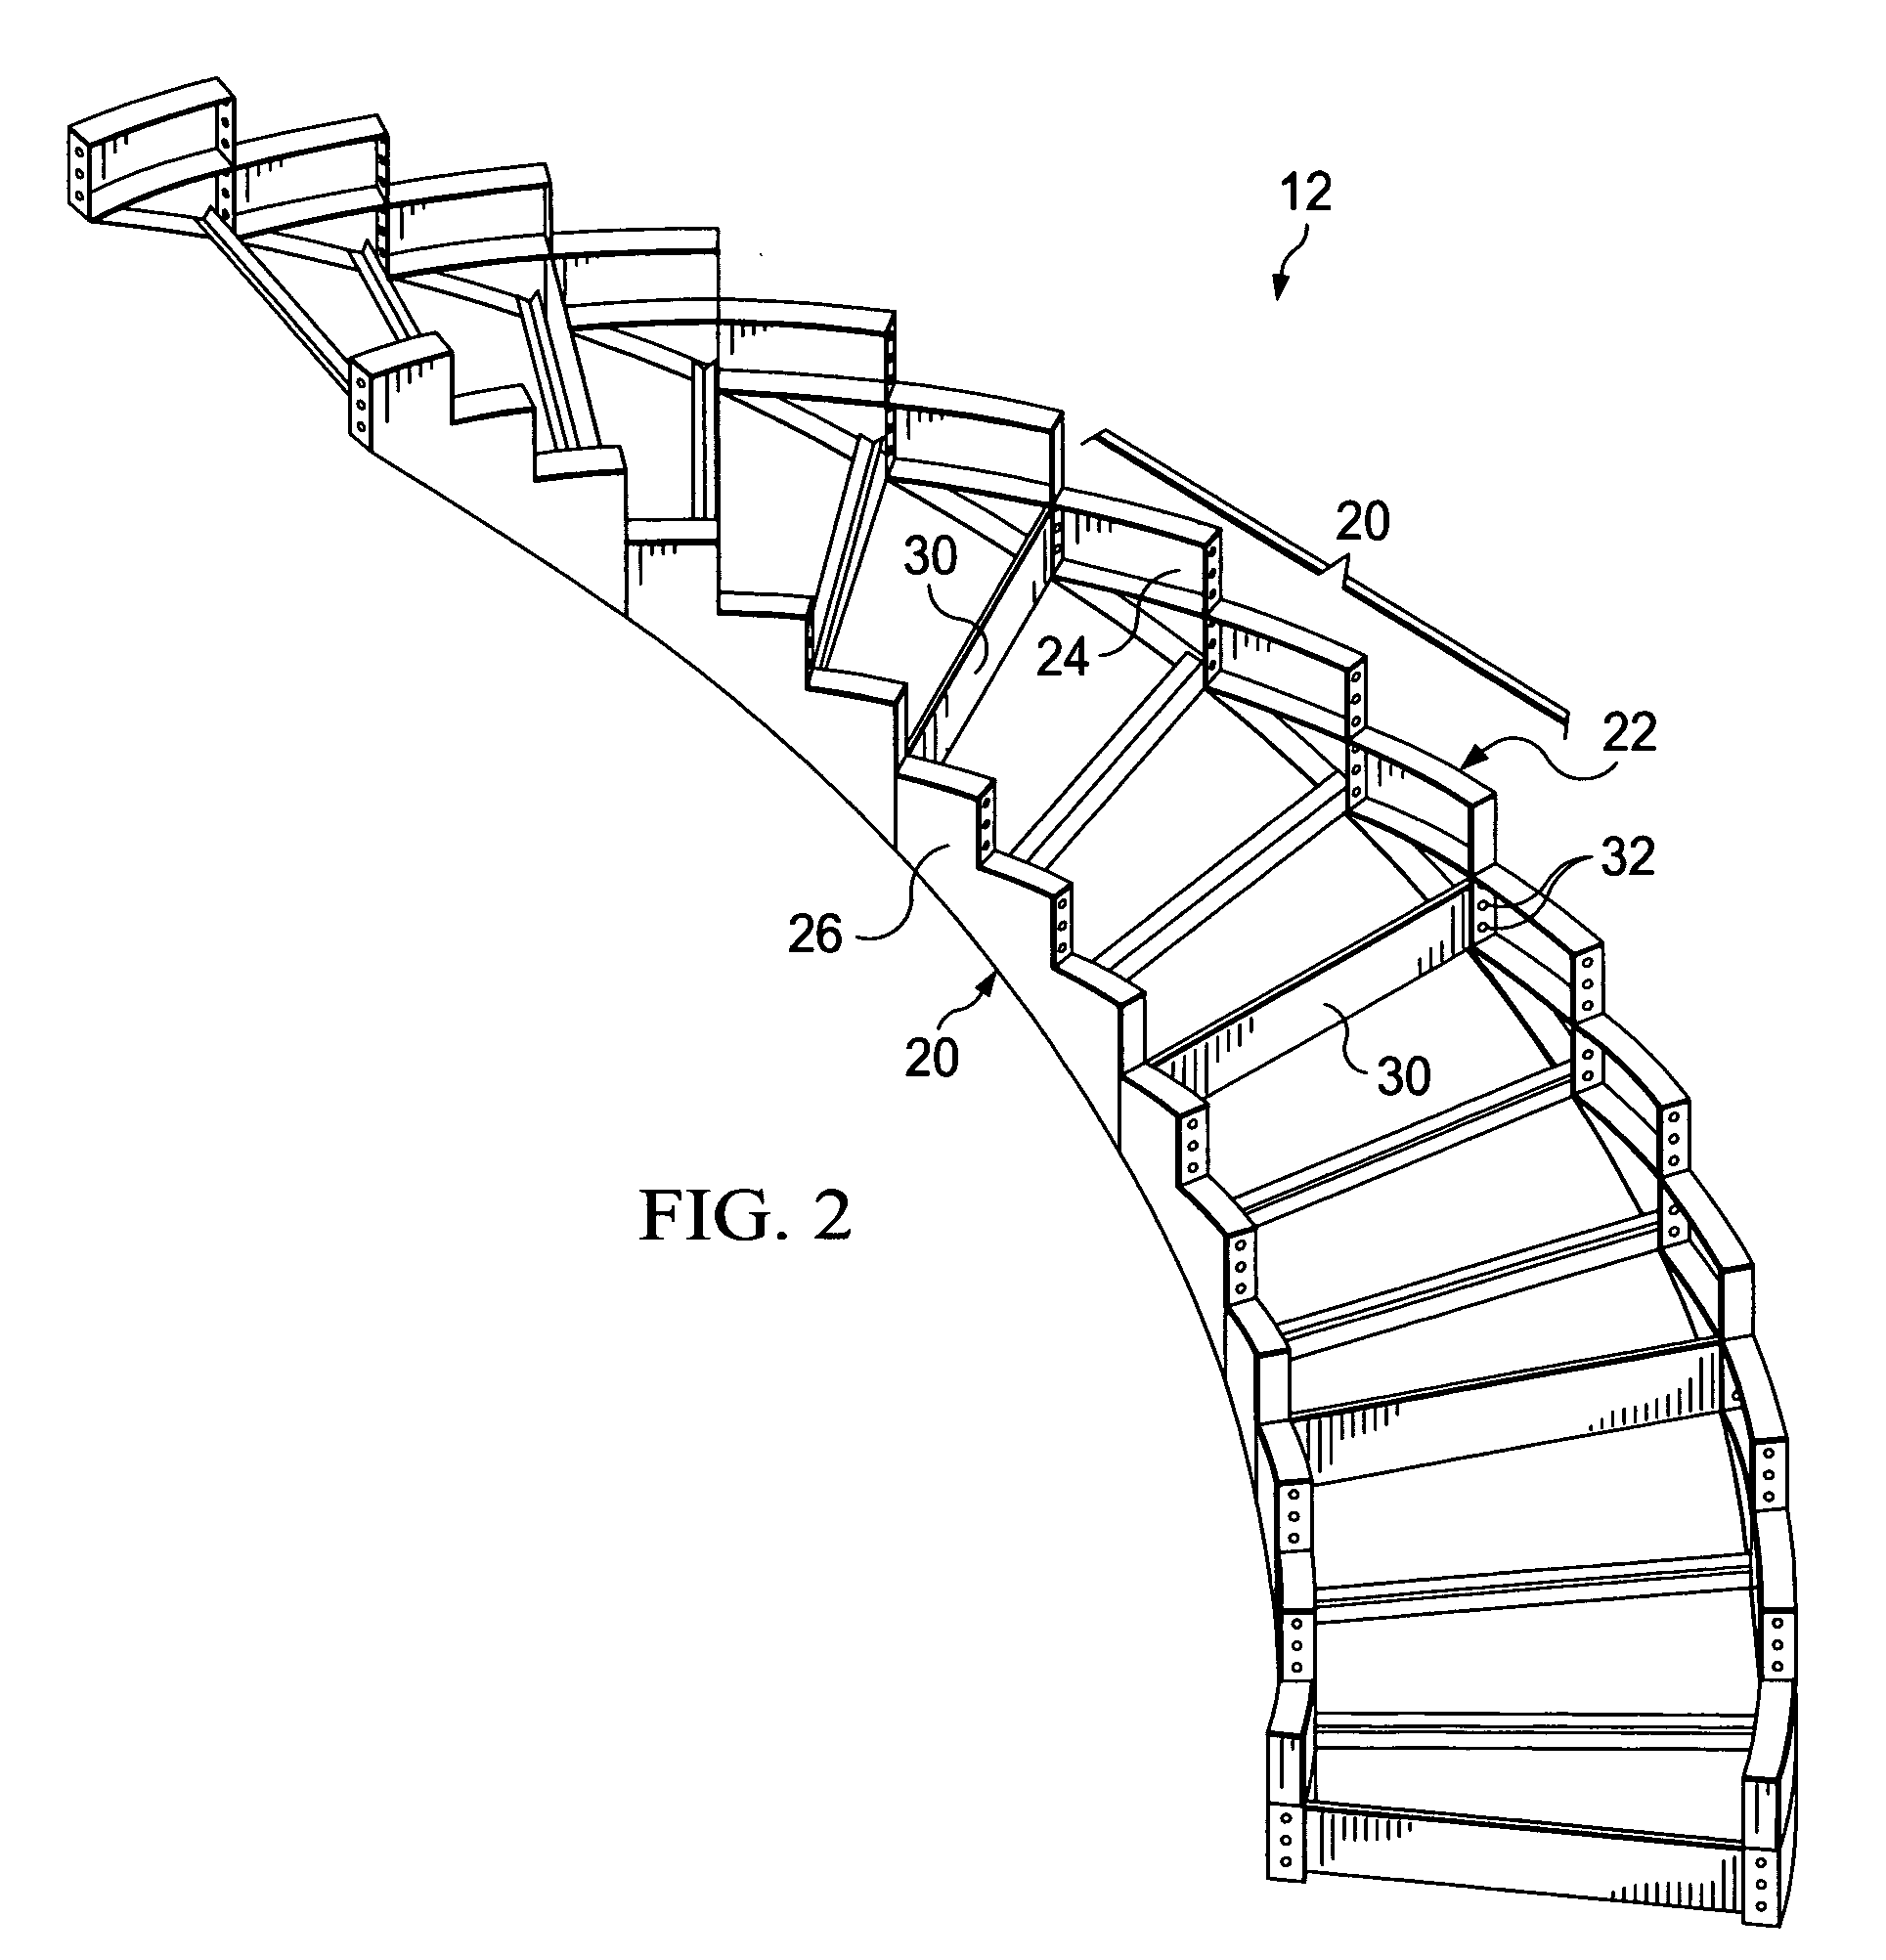 Modular staircase system